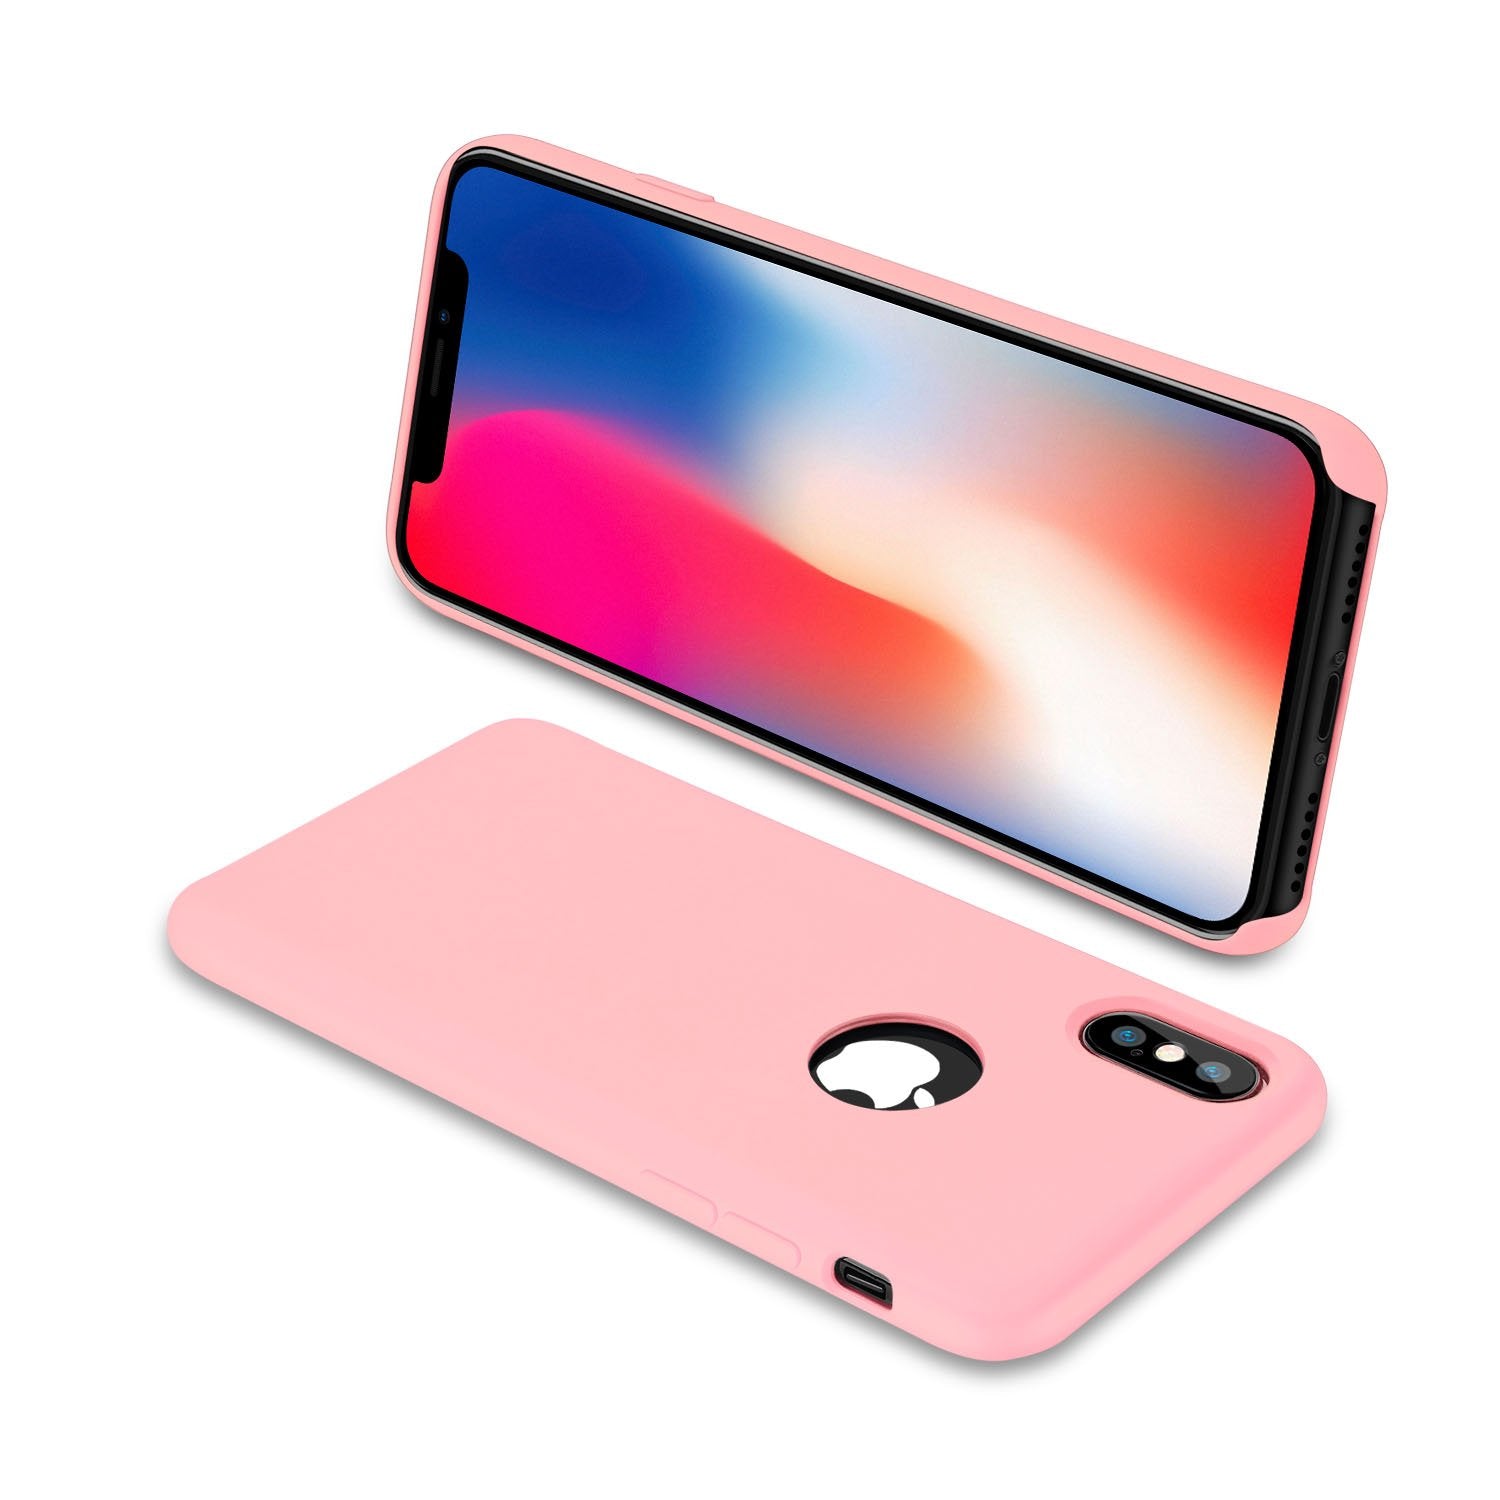 iPhone X Case Liquid Silicone Gel Rubber Case with Soft Microfiber Cloth Lining Cushion for Apple iPhone X (Pink)